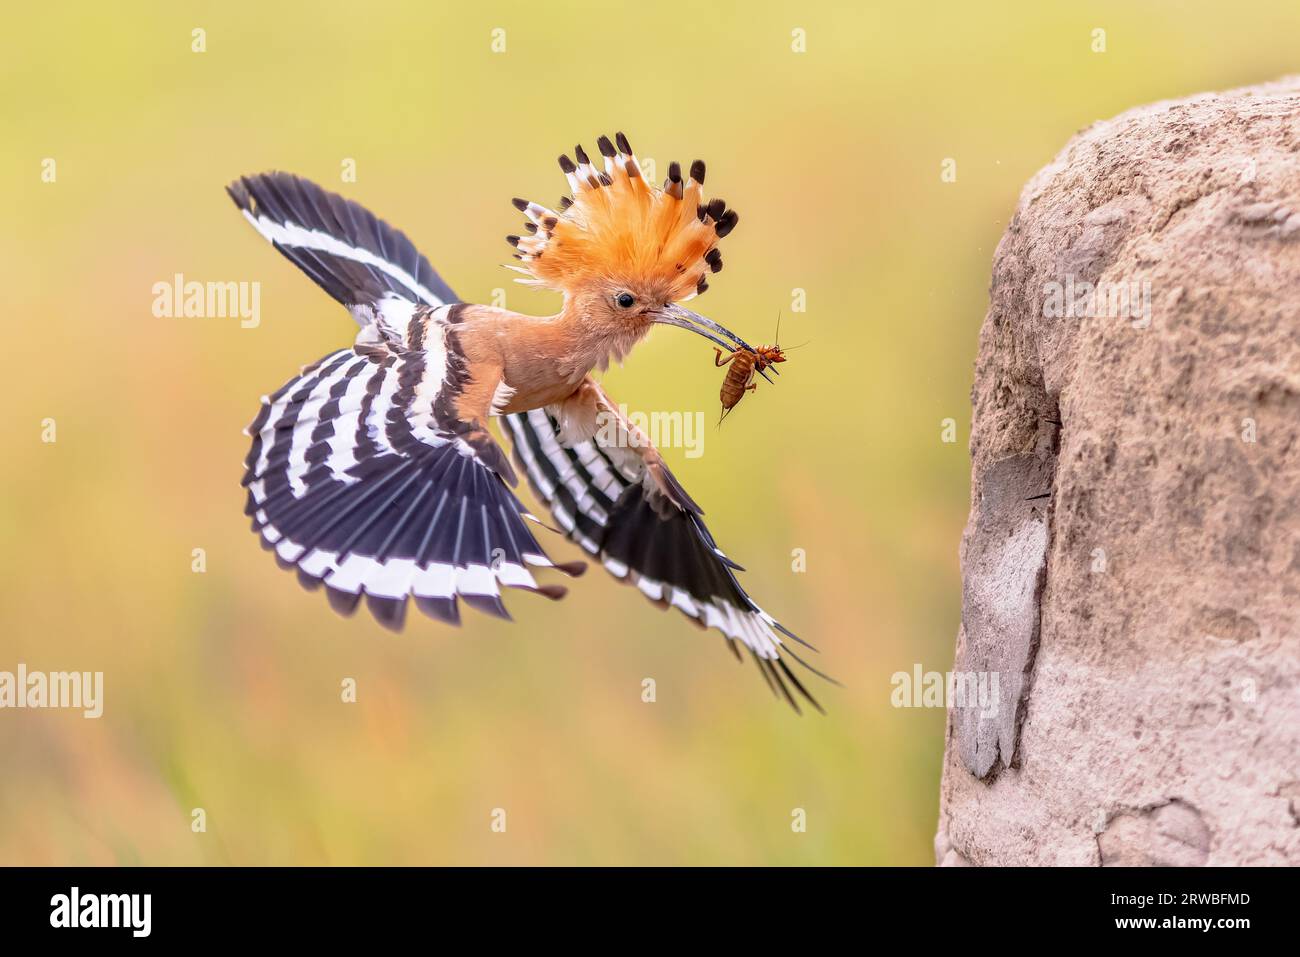 Eurasian hoopoe (Upupa epops) bird with mole cricket insect in beak and raised crest. One of the most beautiful birds of Europe aproaching nesting sit Stock Photo